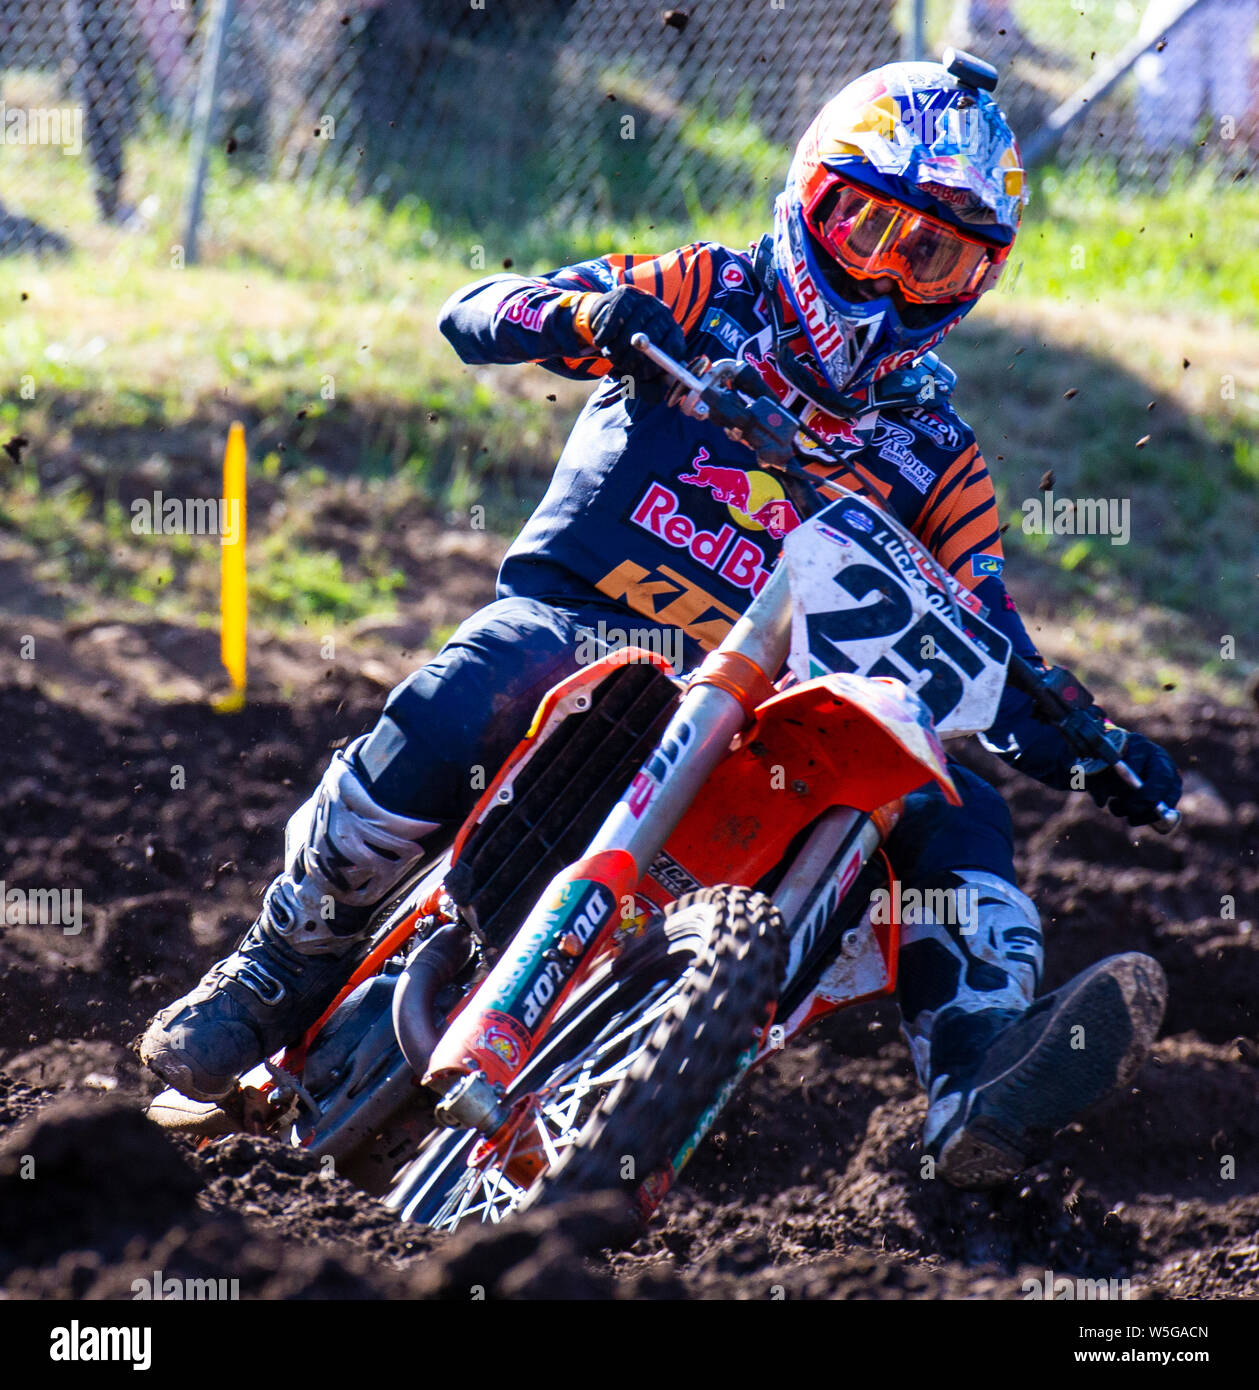 Washougal, WA USA. 27th July, 2019. # 25 Marvin Musqin coming out of section 31 section during the Lucas Oil Pro Motocross Washougal National 450 class championship at Washougal MX park Washougal, WA Thurman James/CSM/Alamy Live News Stock Photo